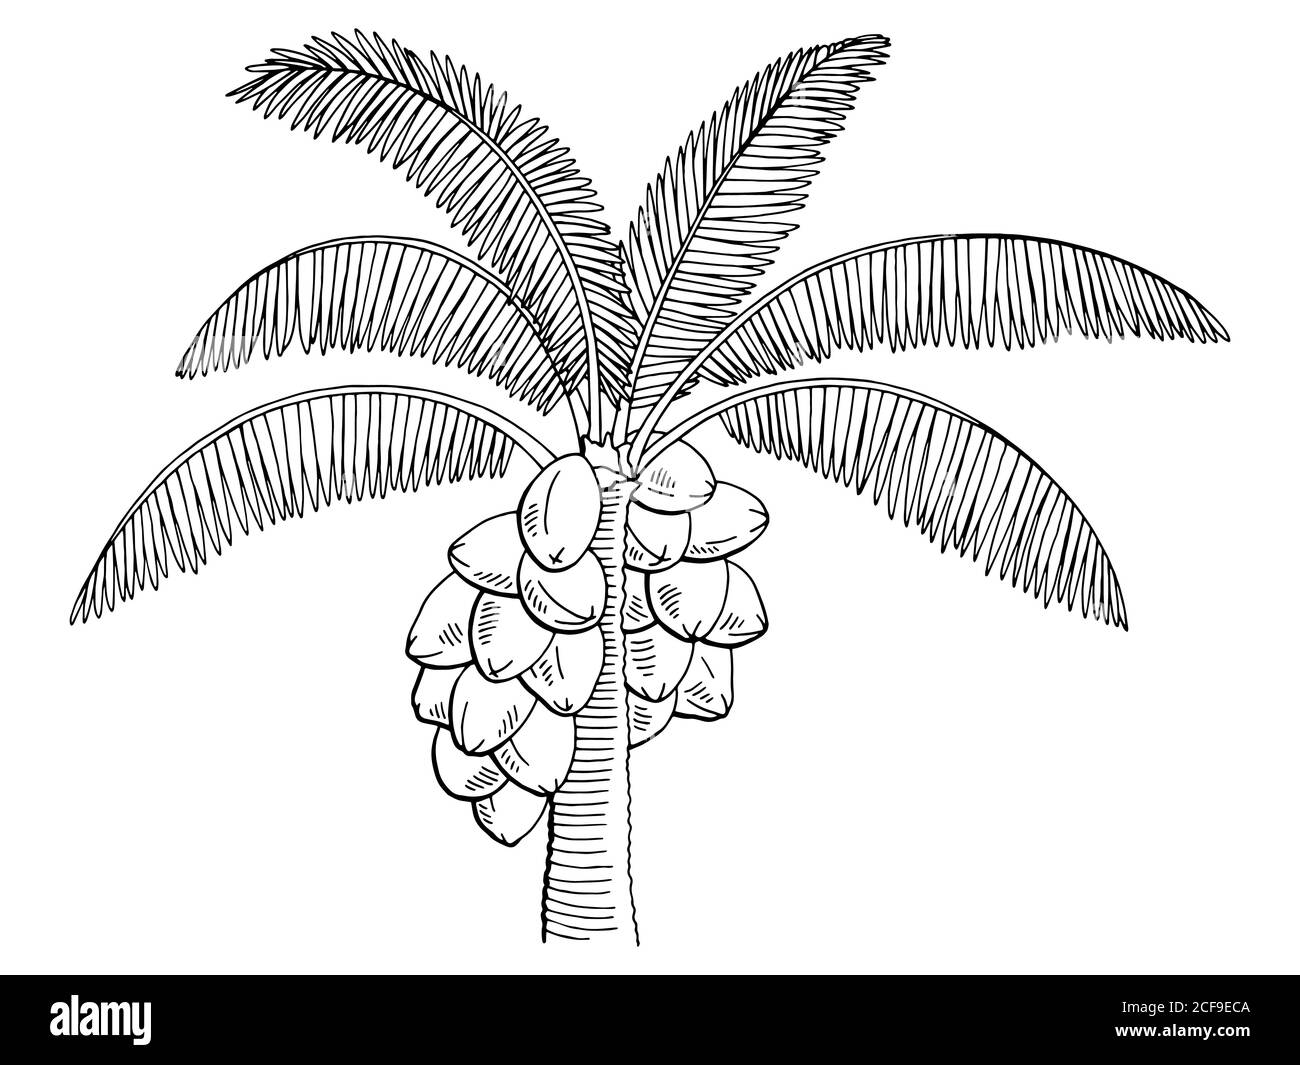 Coconut tree vector black and white Stock Vector Images - Alamy